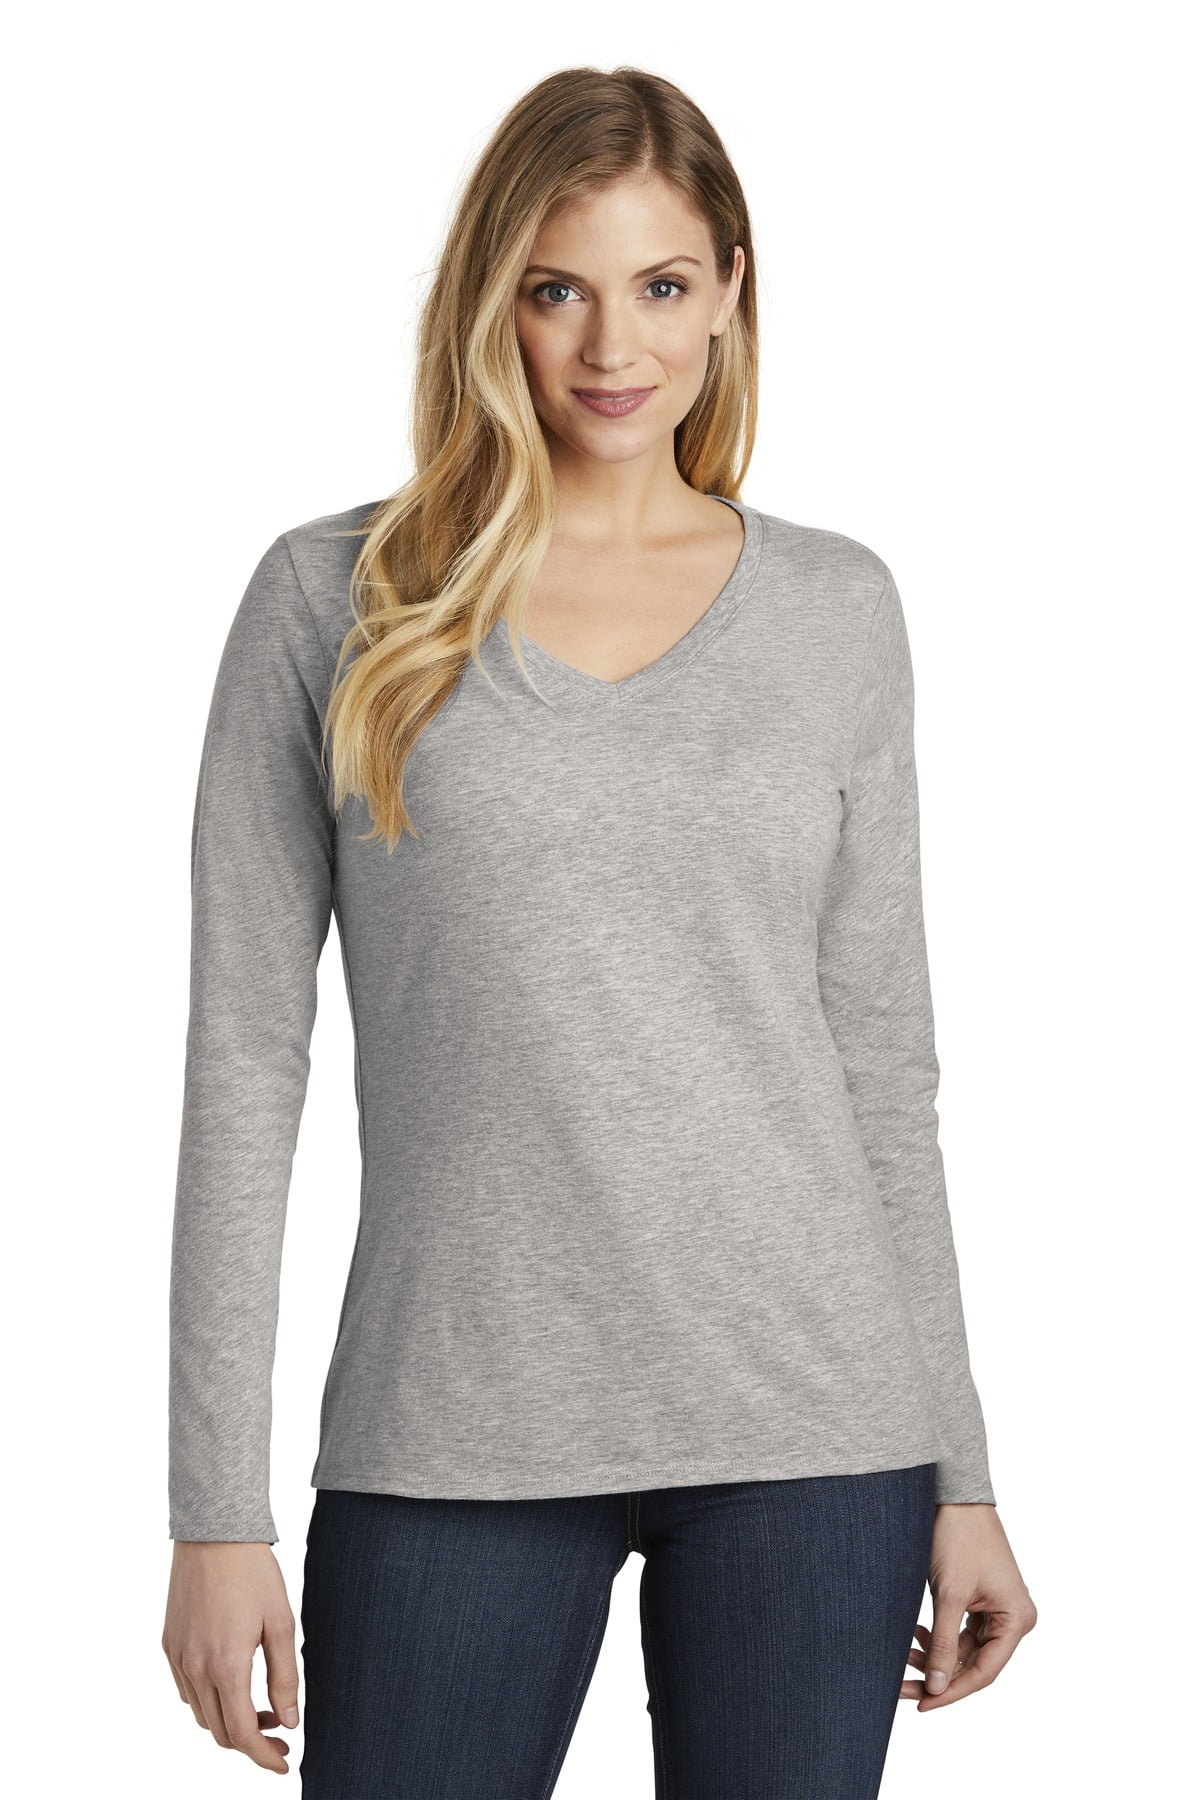 District DT6201 Women’s Very Important Tee Long Sleeve V-Neck Shirt ...